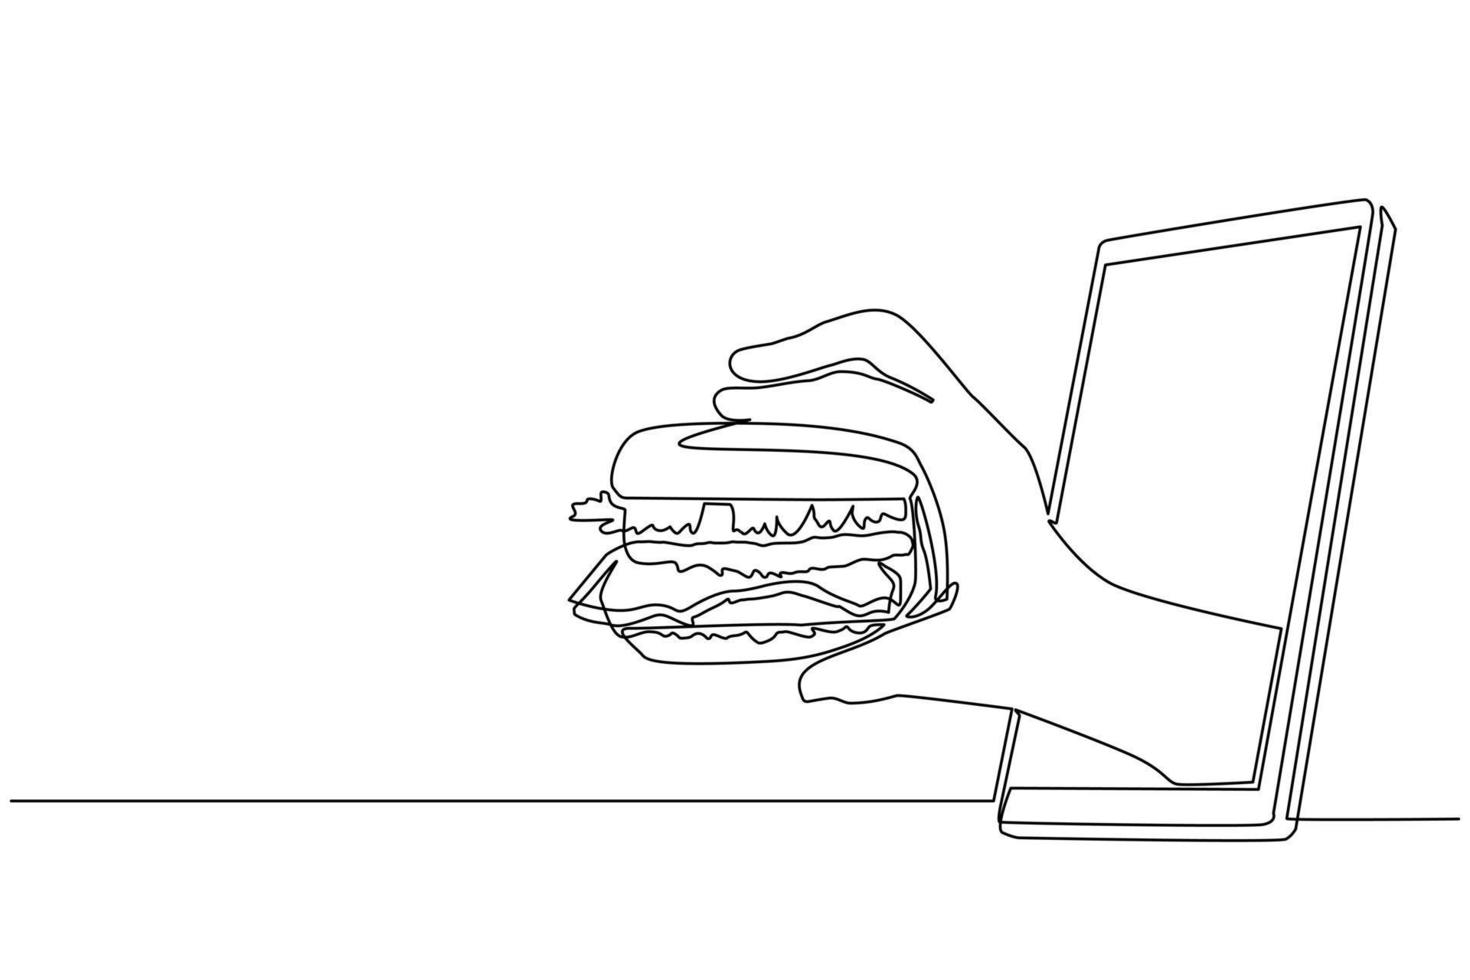 Continuous one line drawing hand holding burger through mobile phone. Concept of restaurant order delivery online food. Application for smartphones. Single line draw design vector graphic illustration